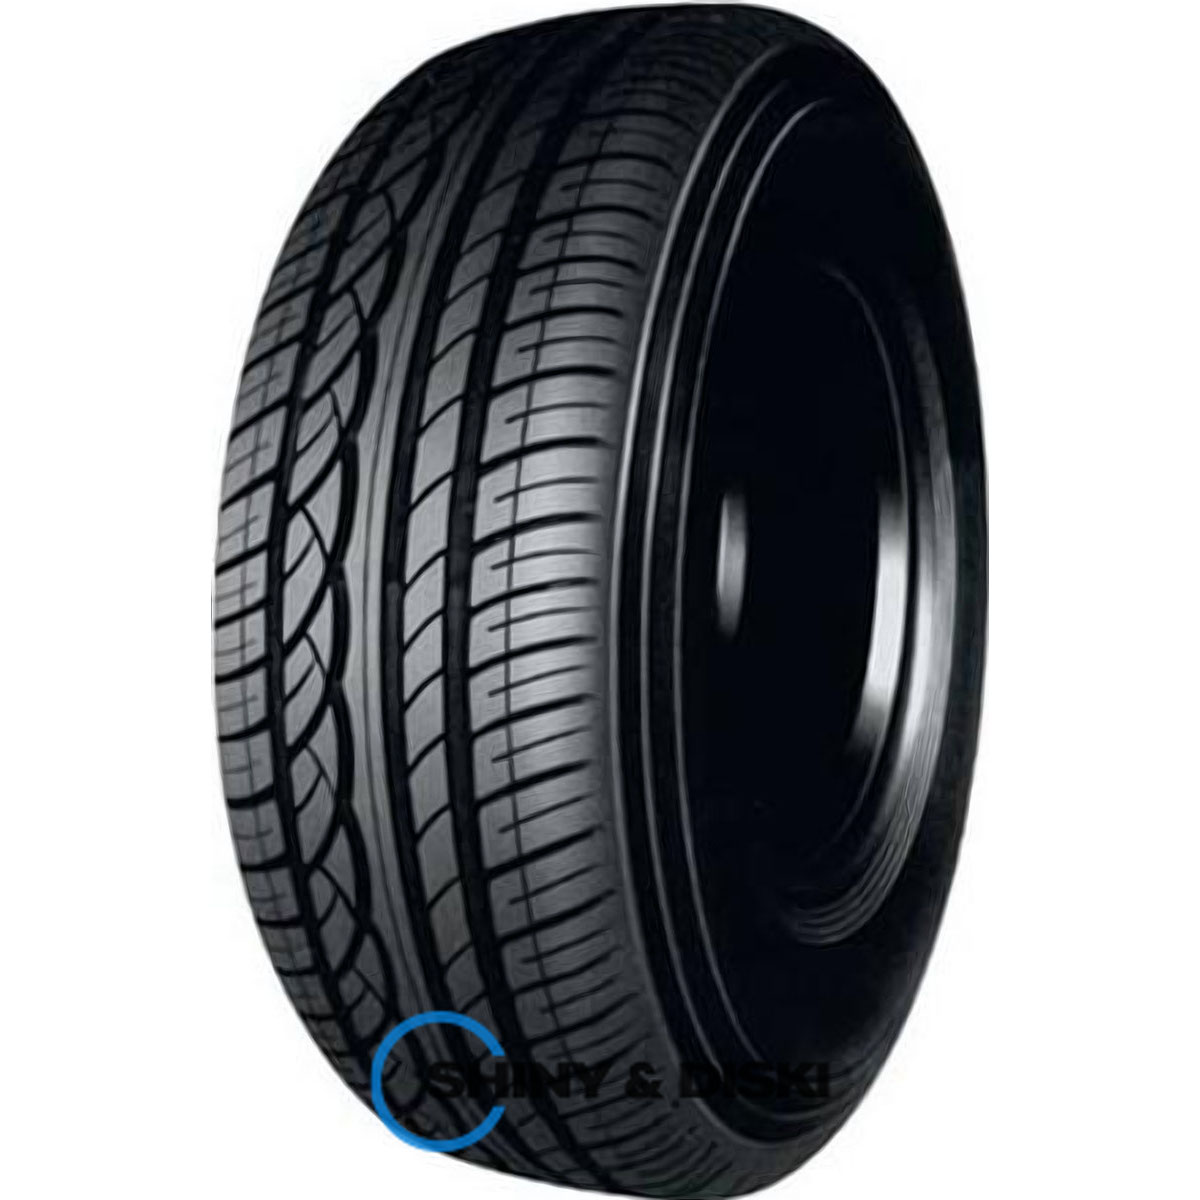 infinity inf-040 165/70 r14 81t